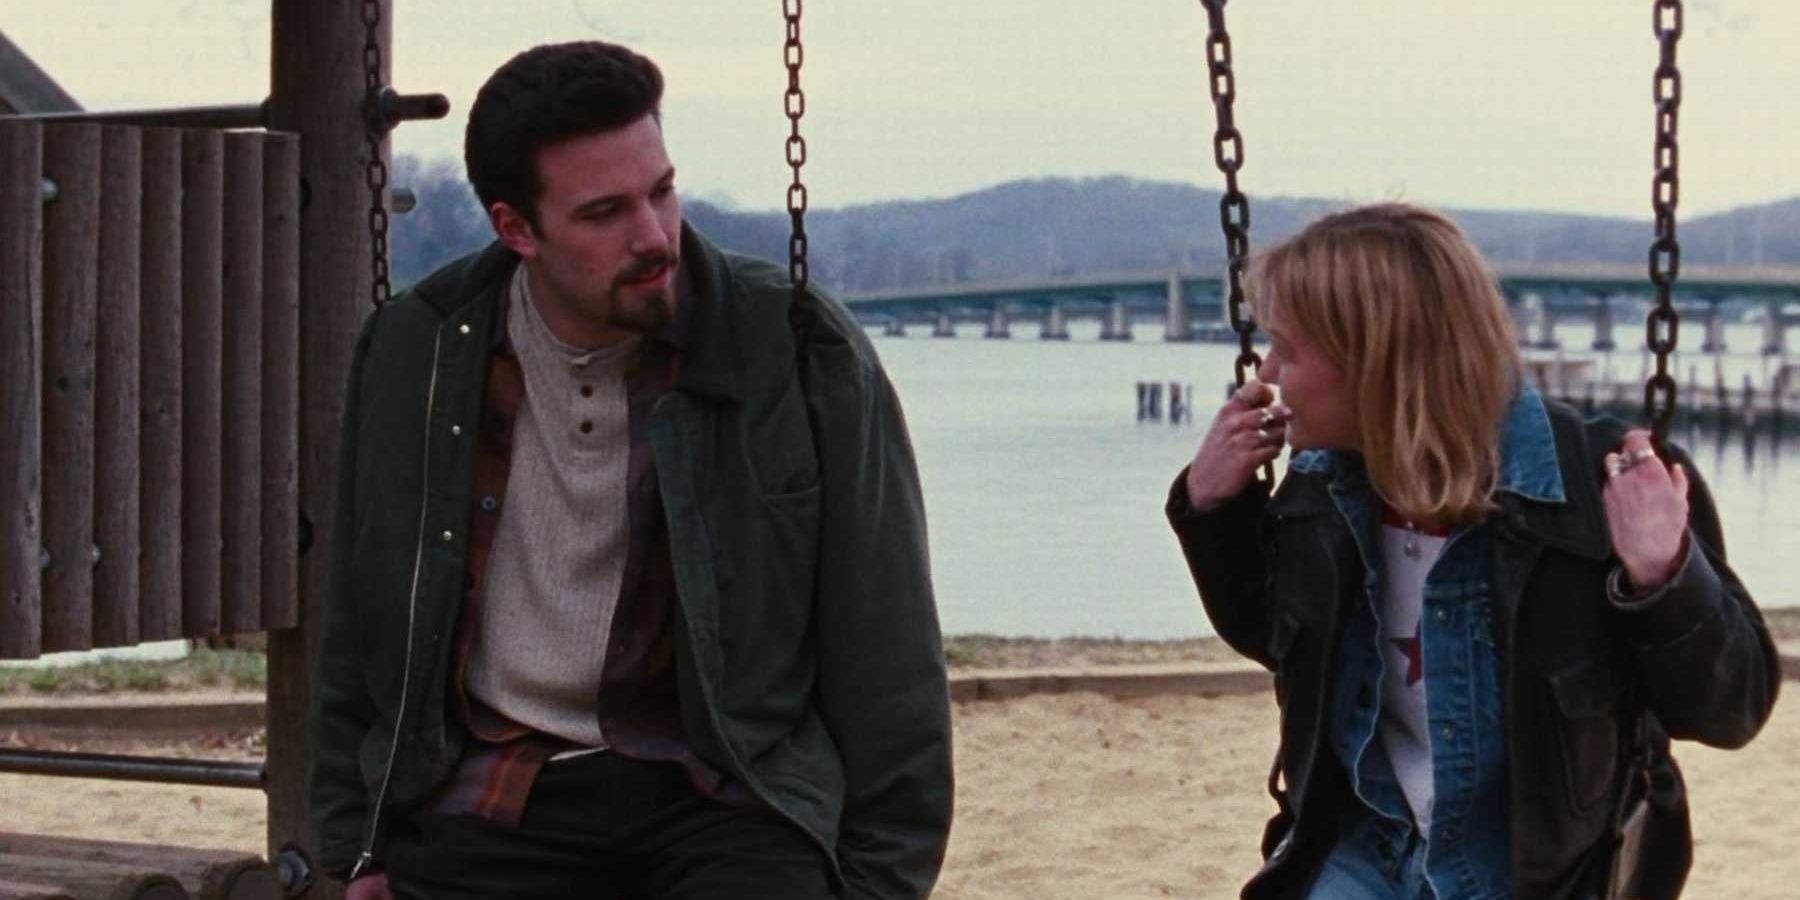 Holden and Alyssa on a swing in Chasing Amy